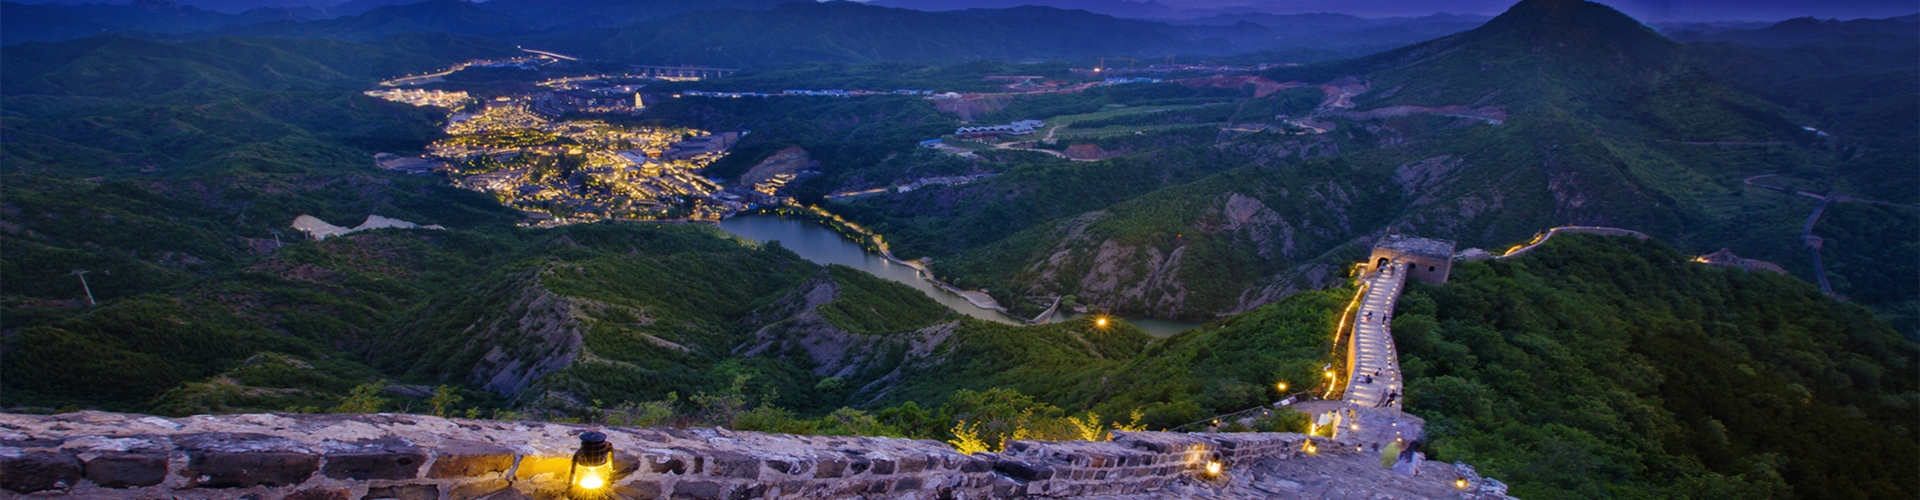 The Great Wall at Gubeikou: Features, Facts, and Travel Tips